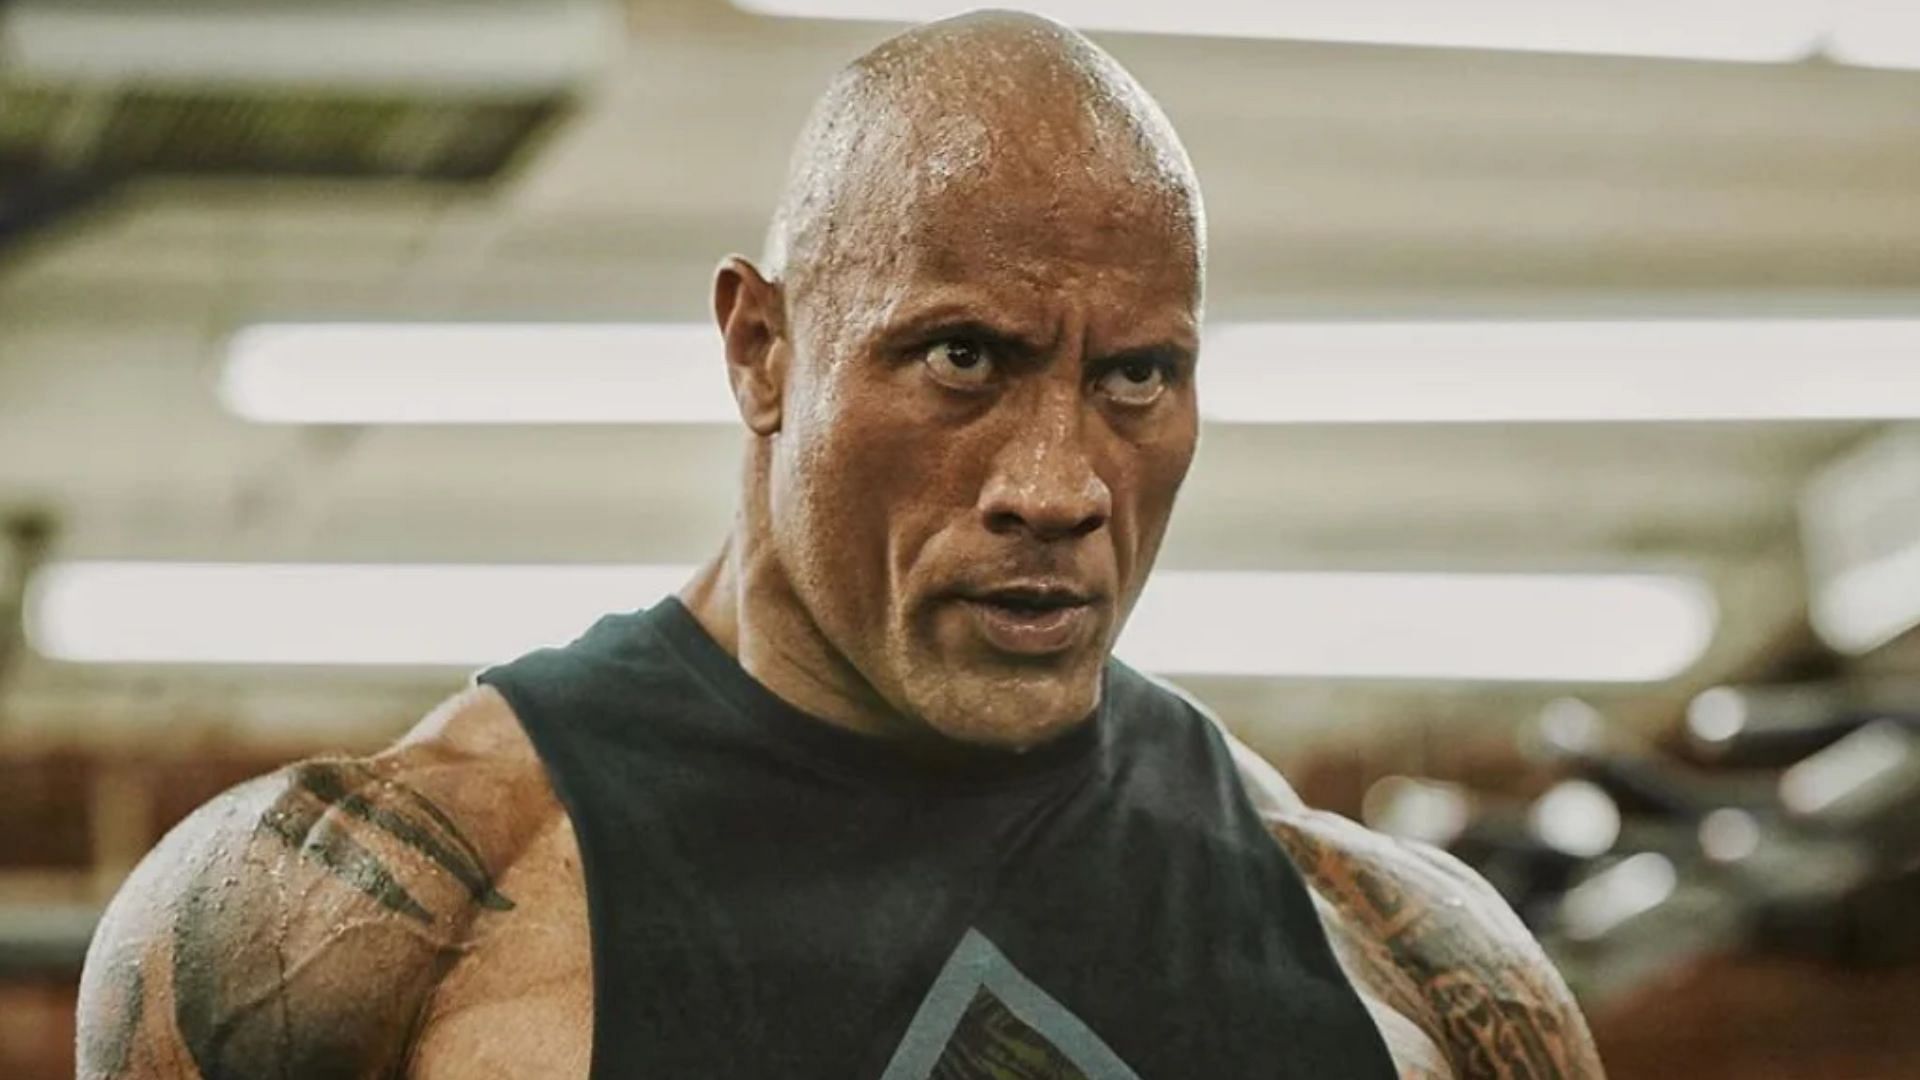 &quot;I can not be f**king broke,&quot; The Rock said.